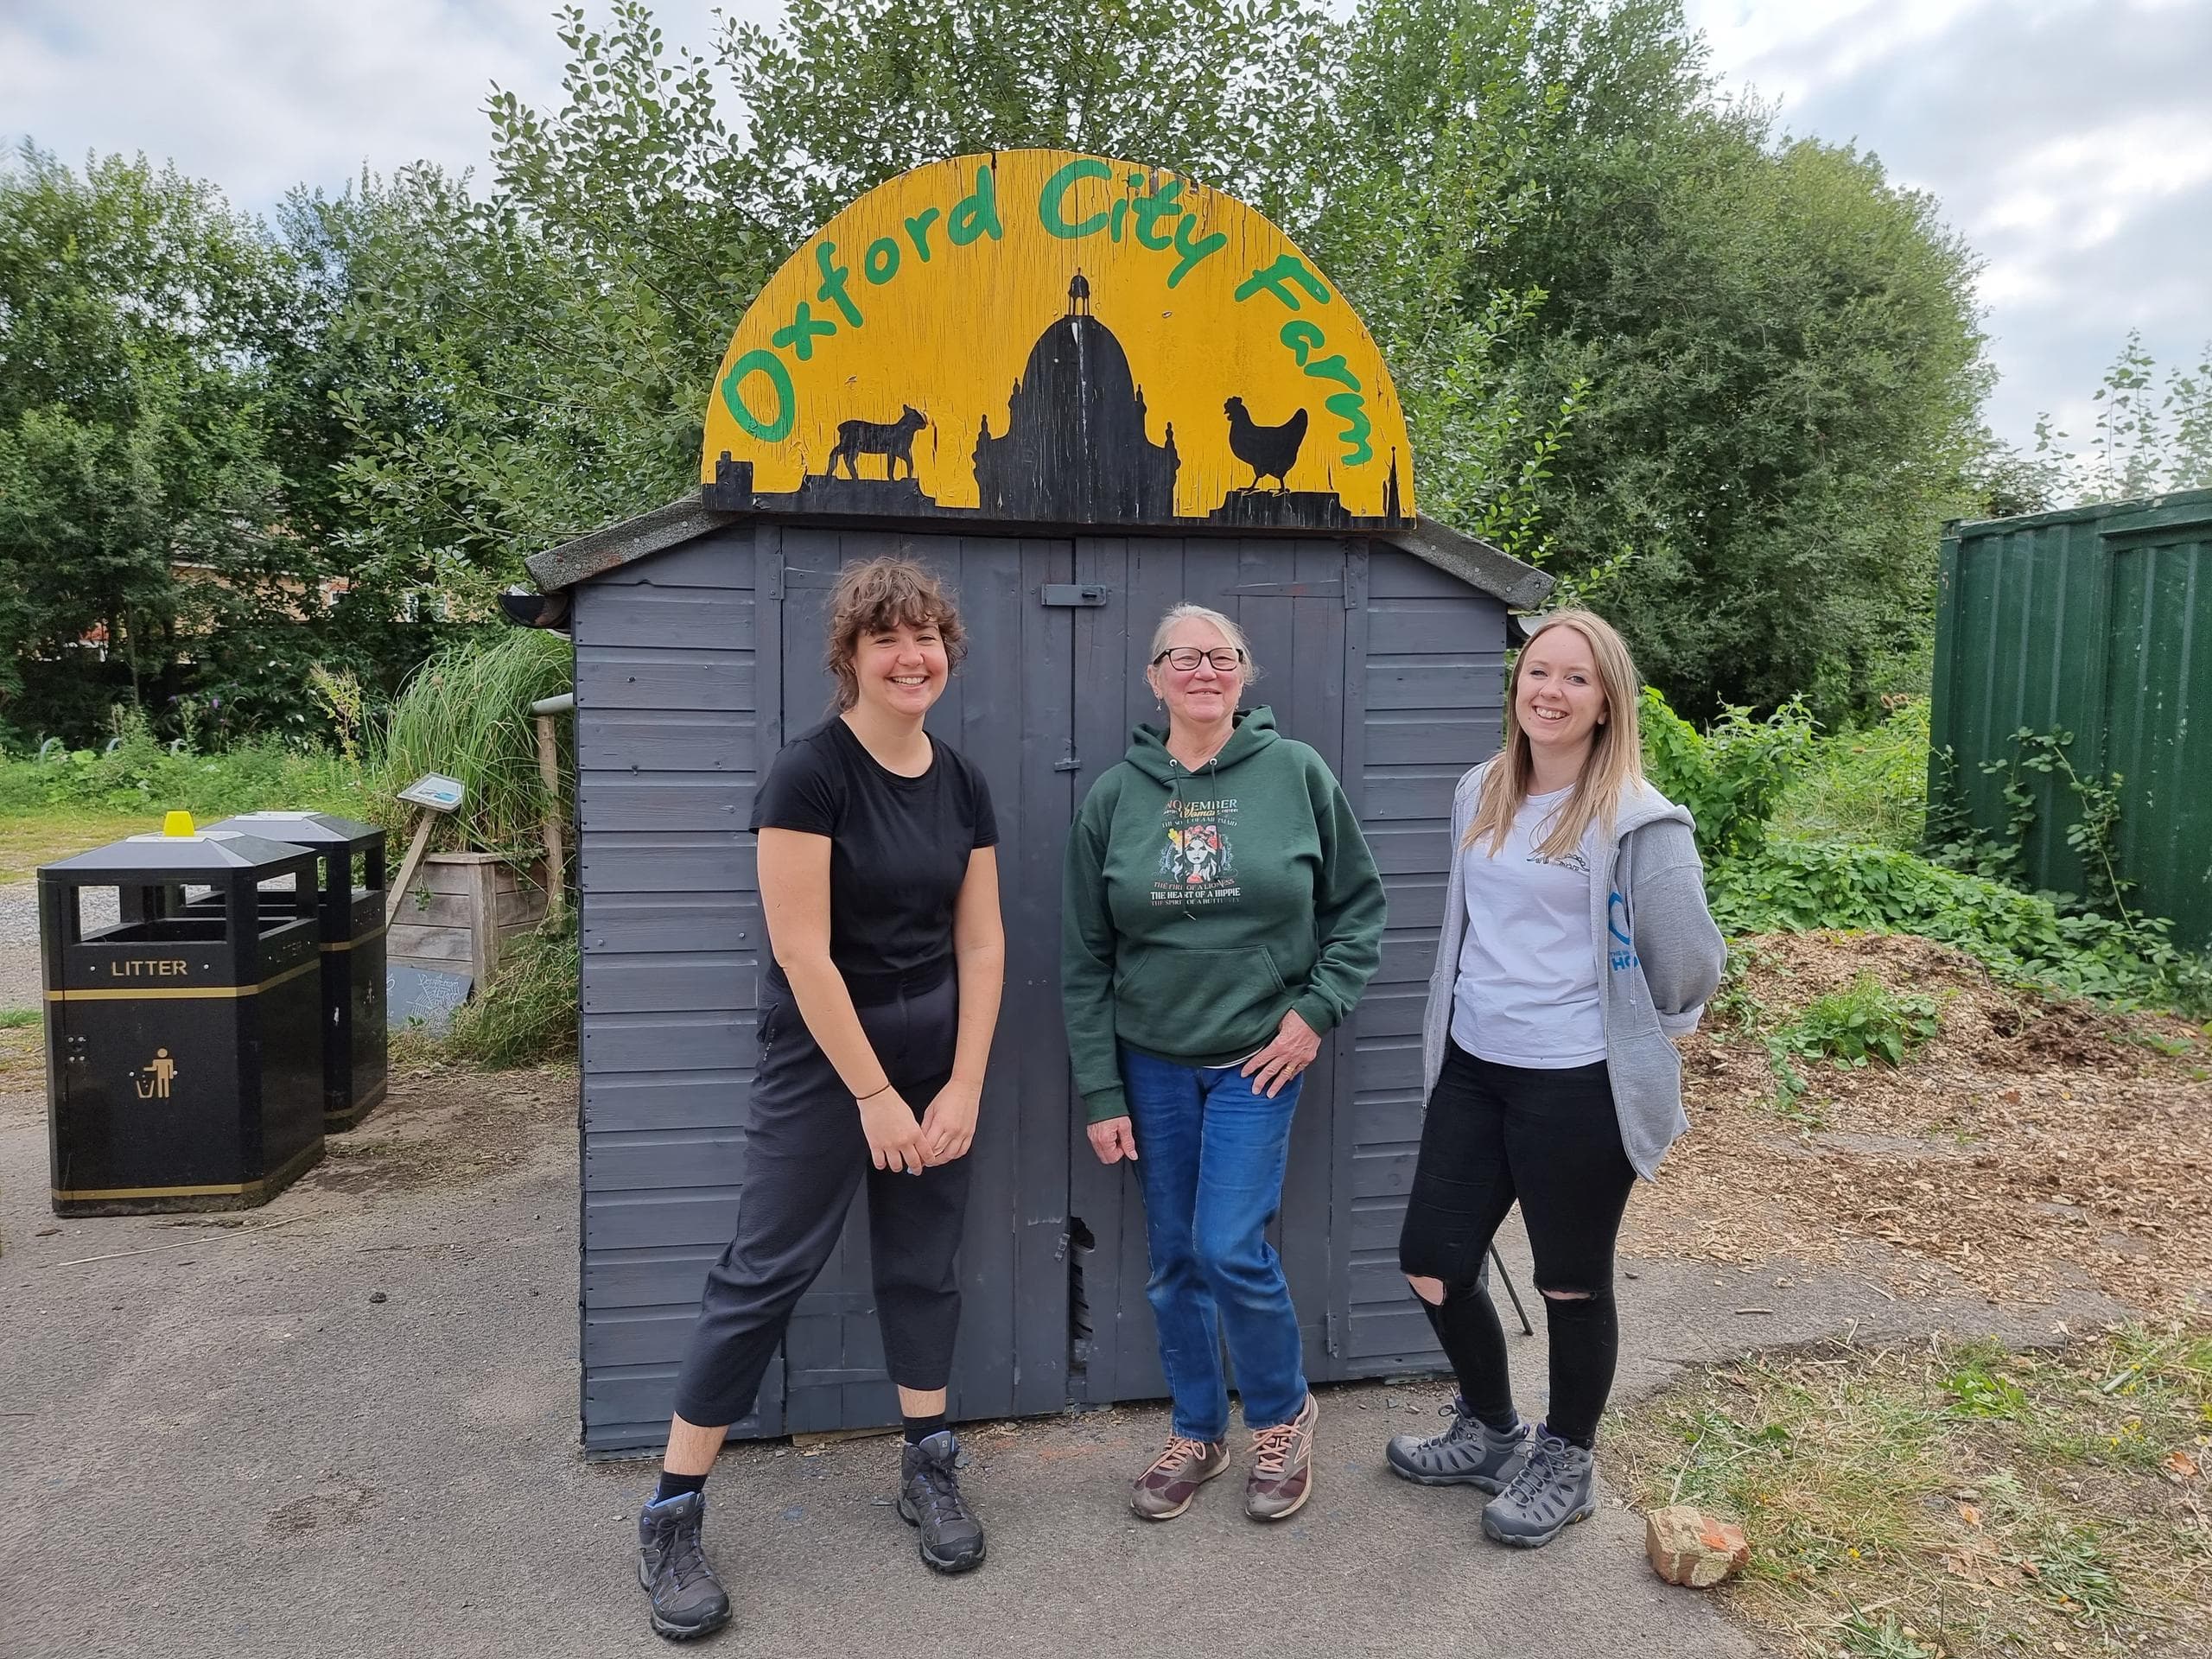 Gemma, Linda and Mel show off the shed's new paintjob